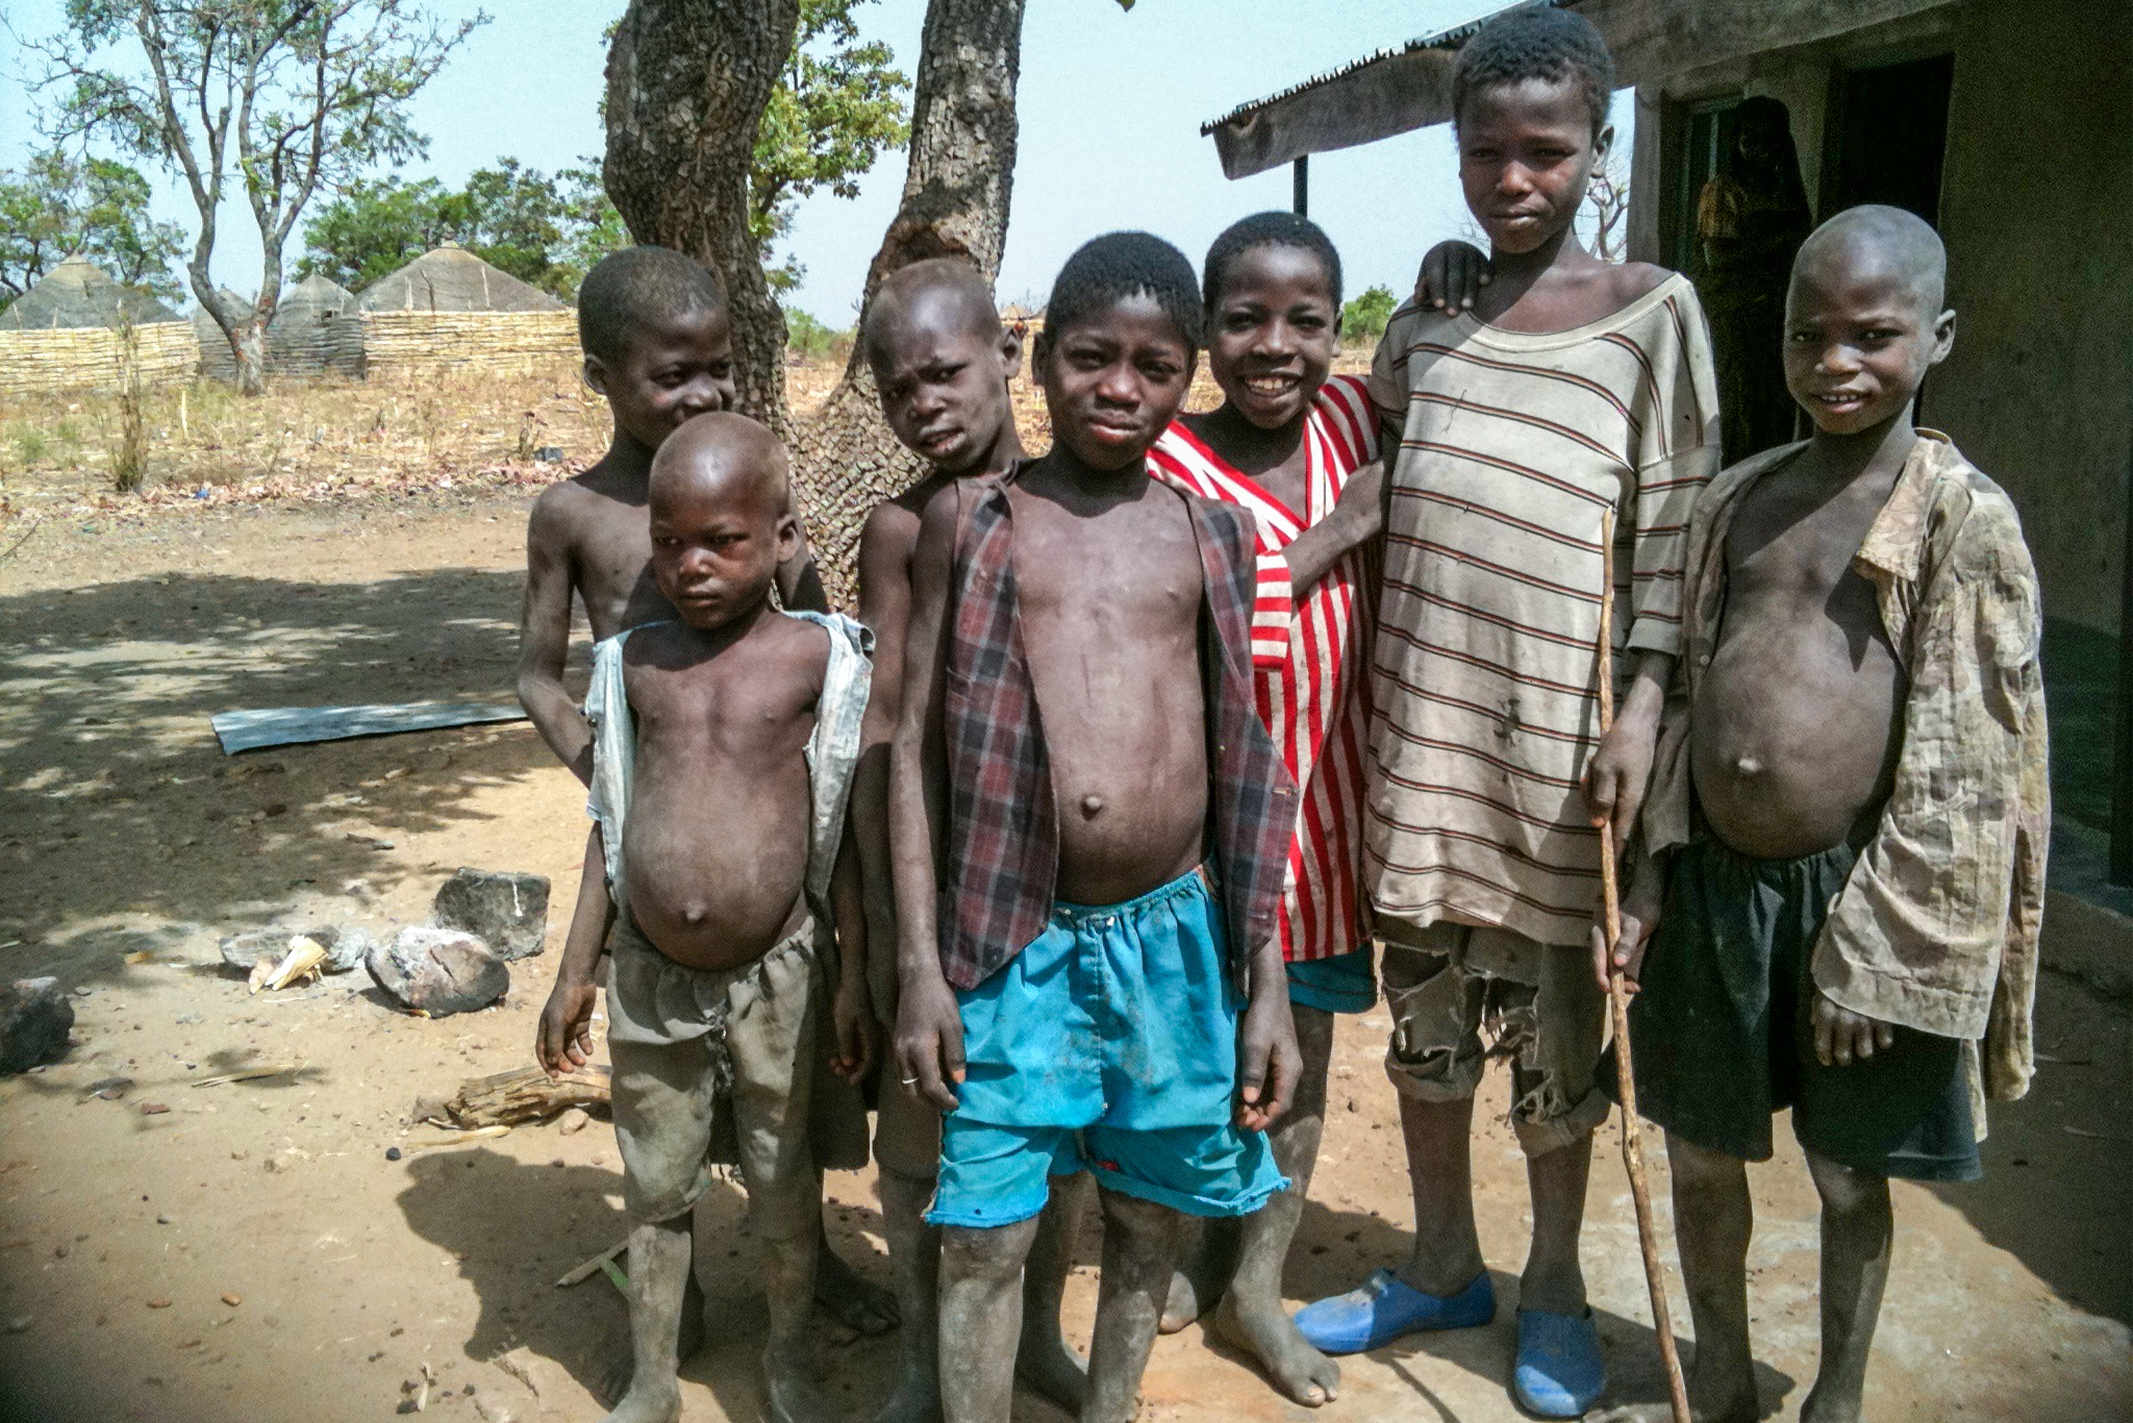 7 Nigerian boys standing outside of their house wearing tattered clothes and their legs covered in dirt